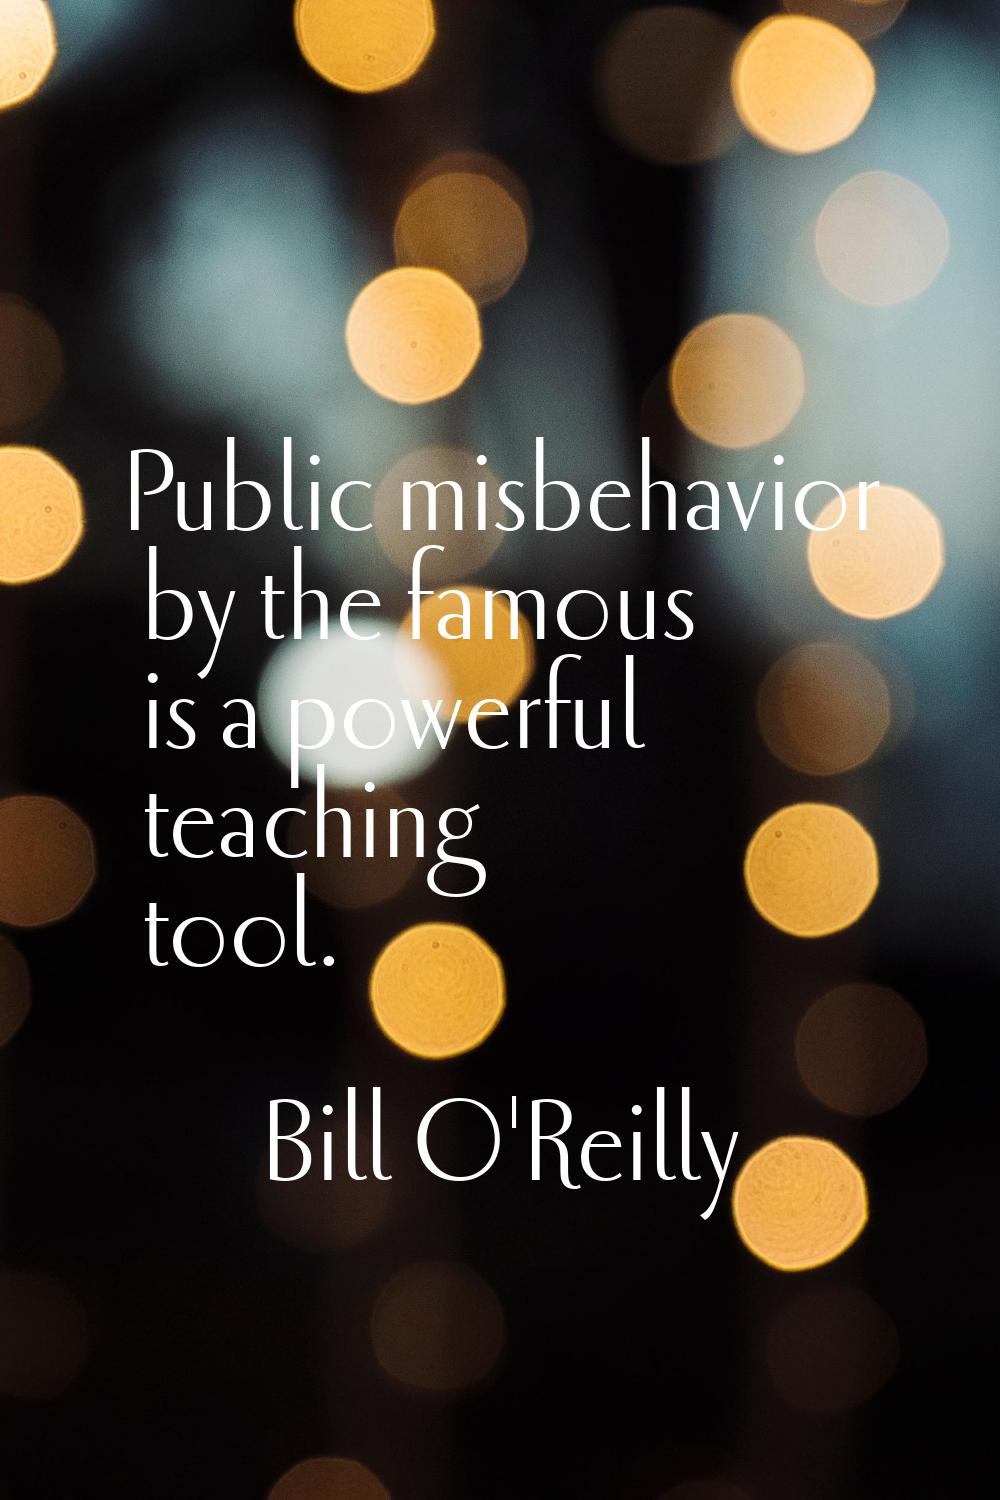 Public misbehavior by the famous is a powerful teaching tool.